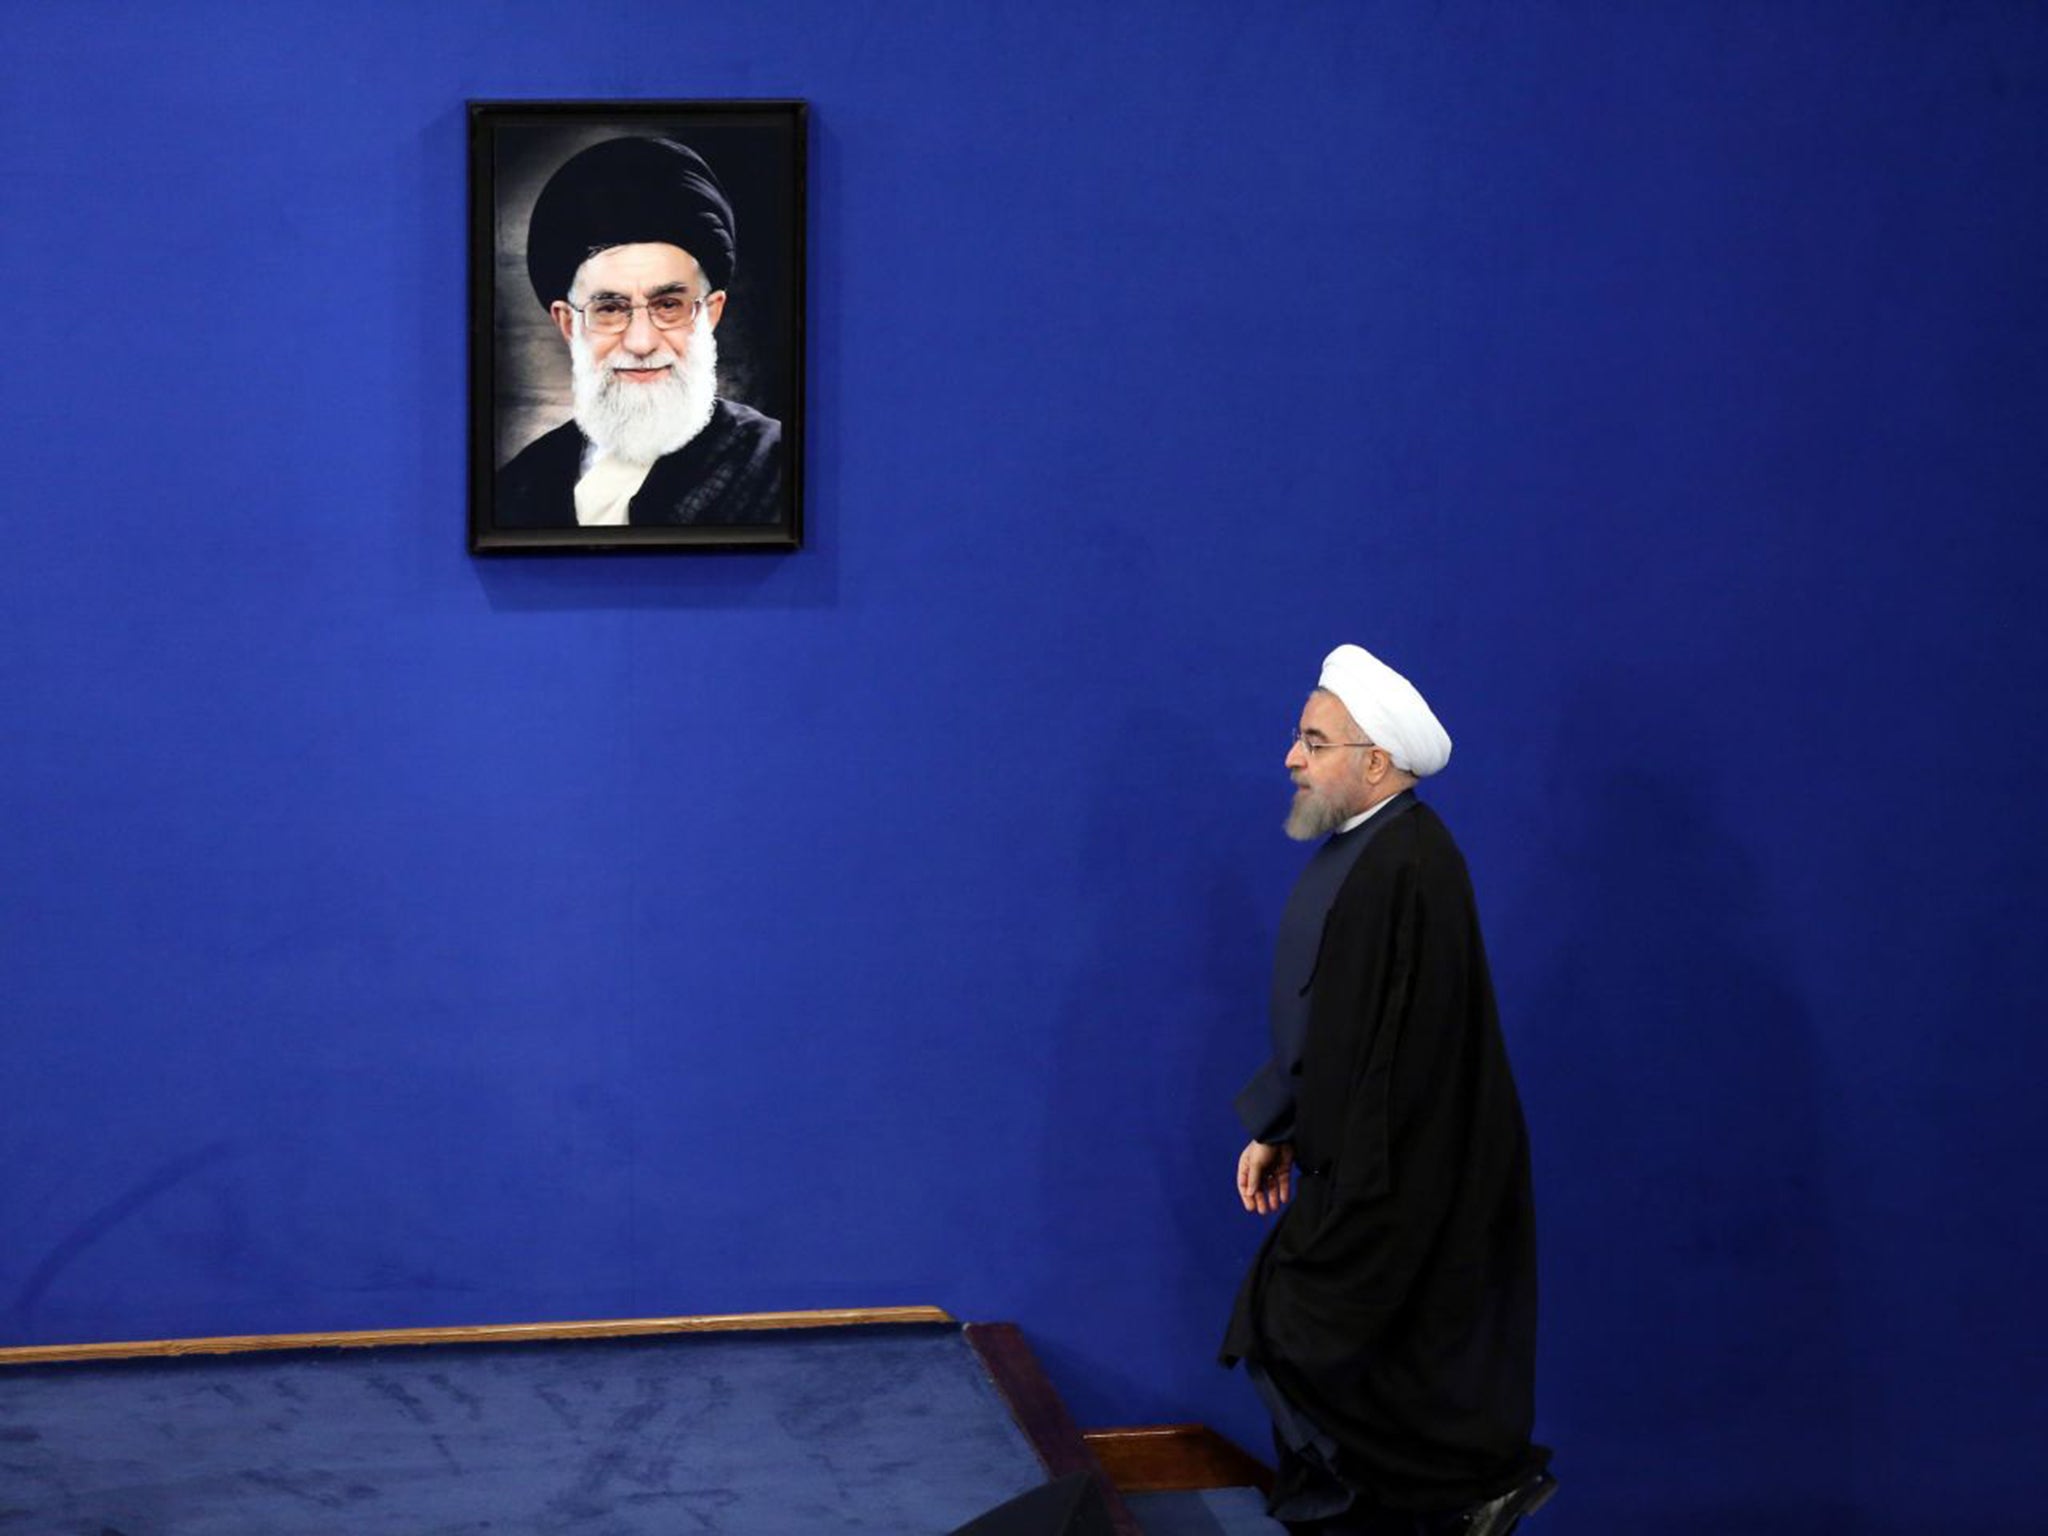 Iran’s President Hassan Rouhani, who is fighting for re-election, has indicated relations with the US could improve – but the country’s supreme leader Ayatollah Ali Khamenei (in frame) disagrees